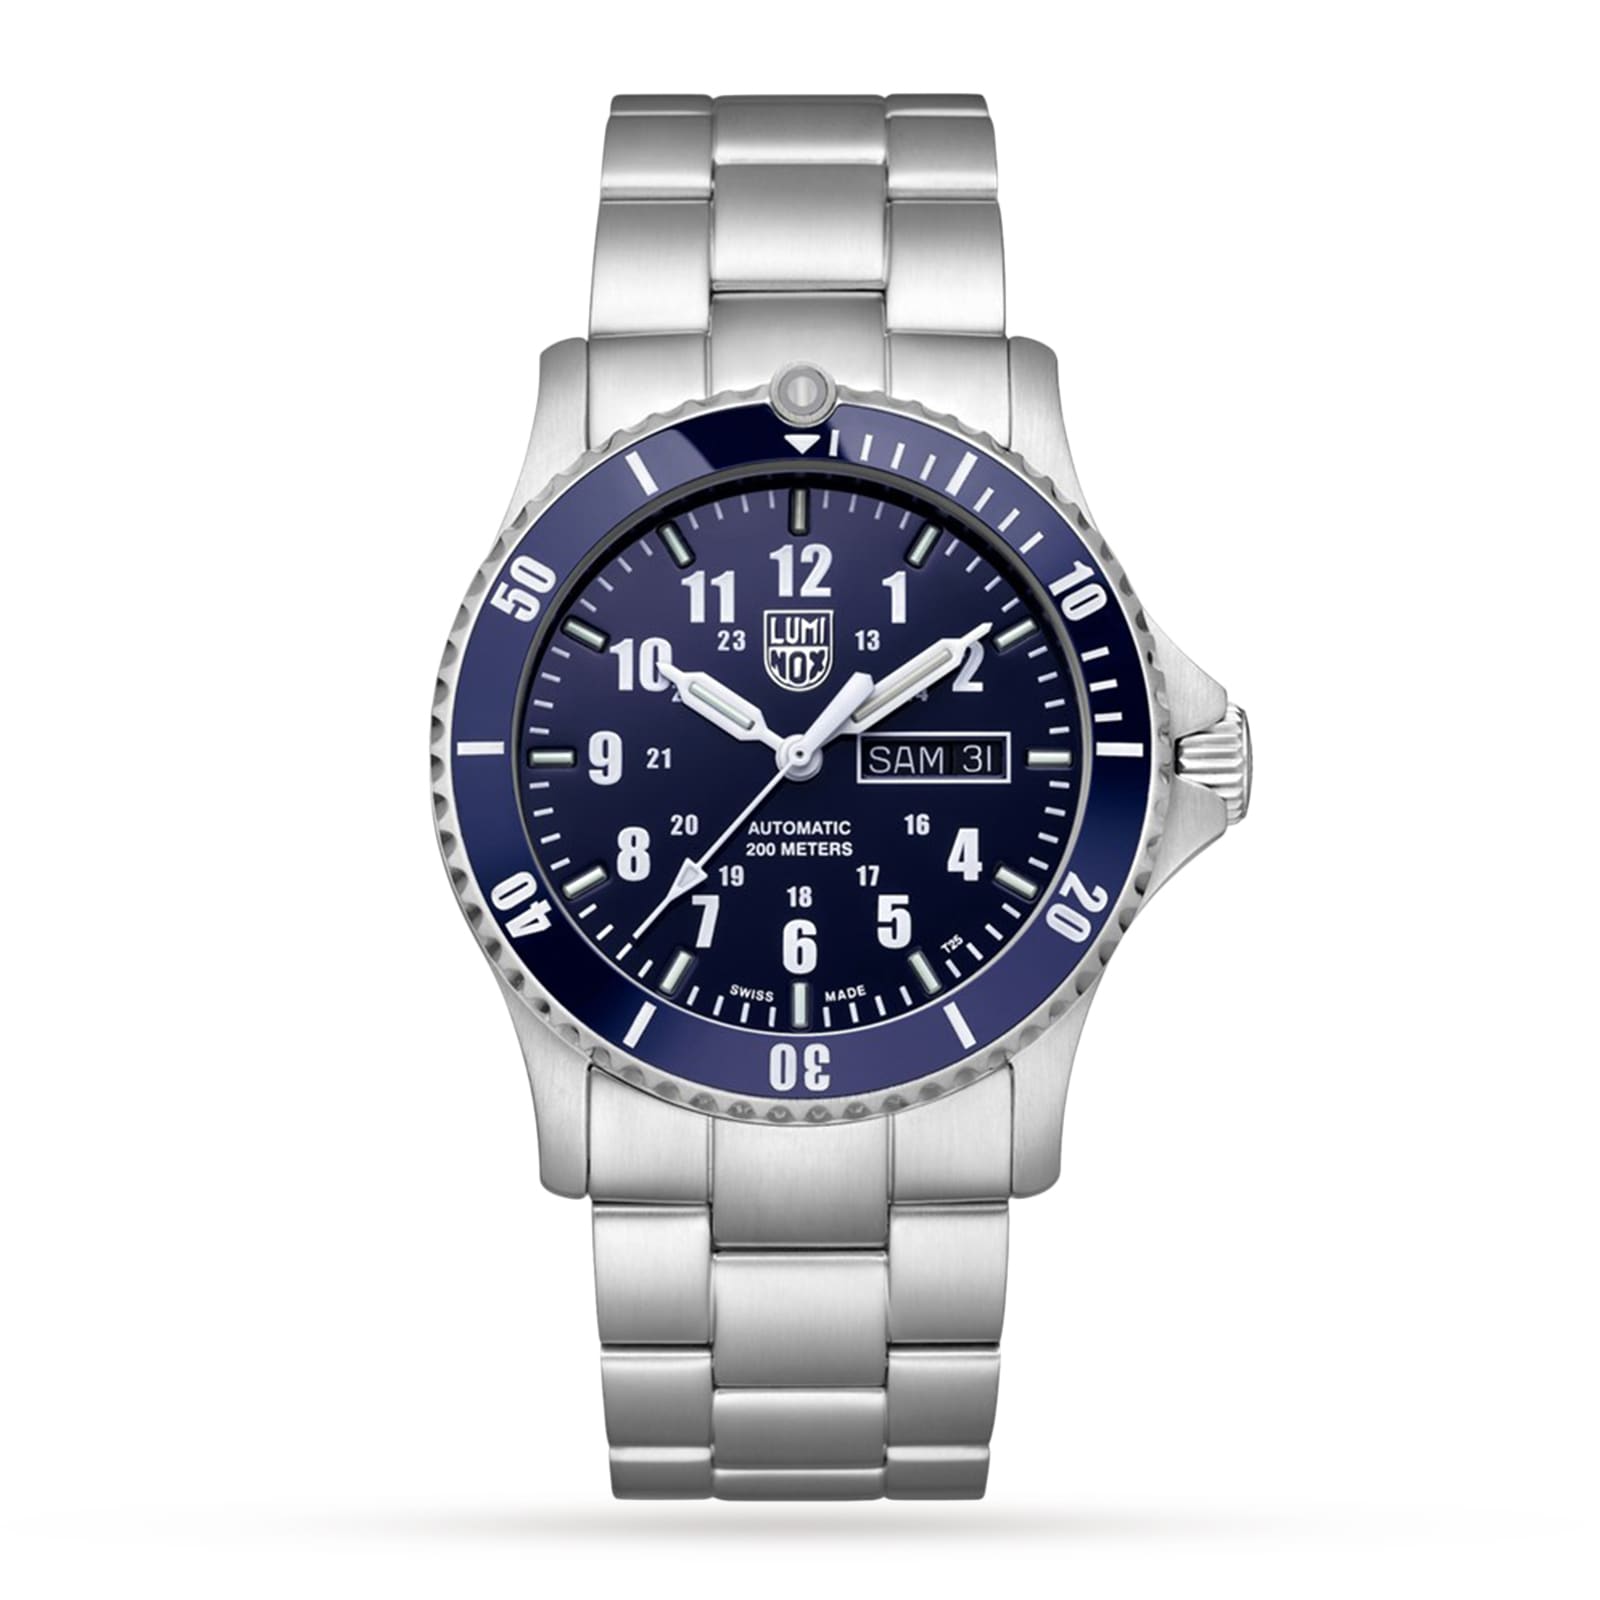 Automatic Sport Timer 42mm, Blue Dial Sport Watch